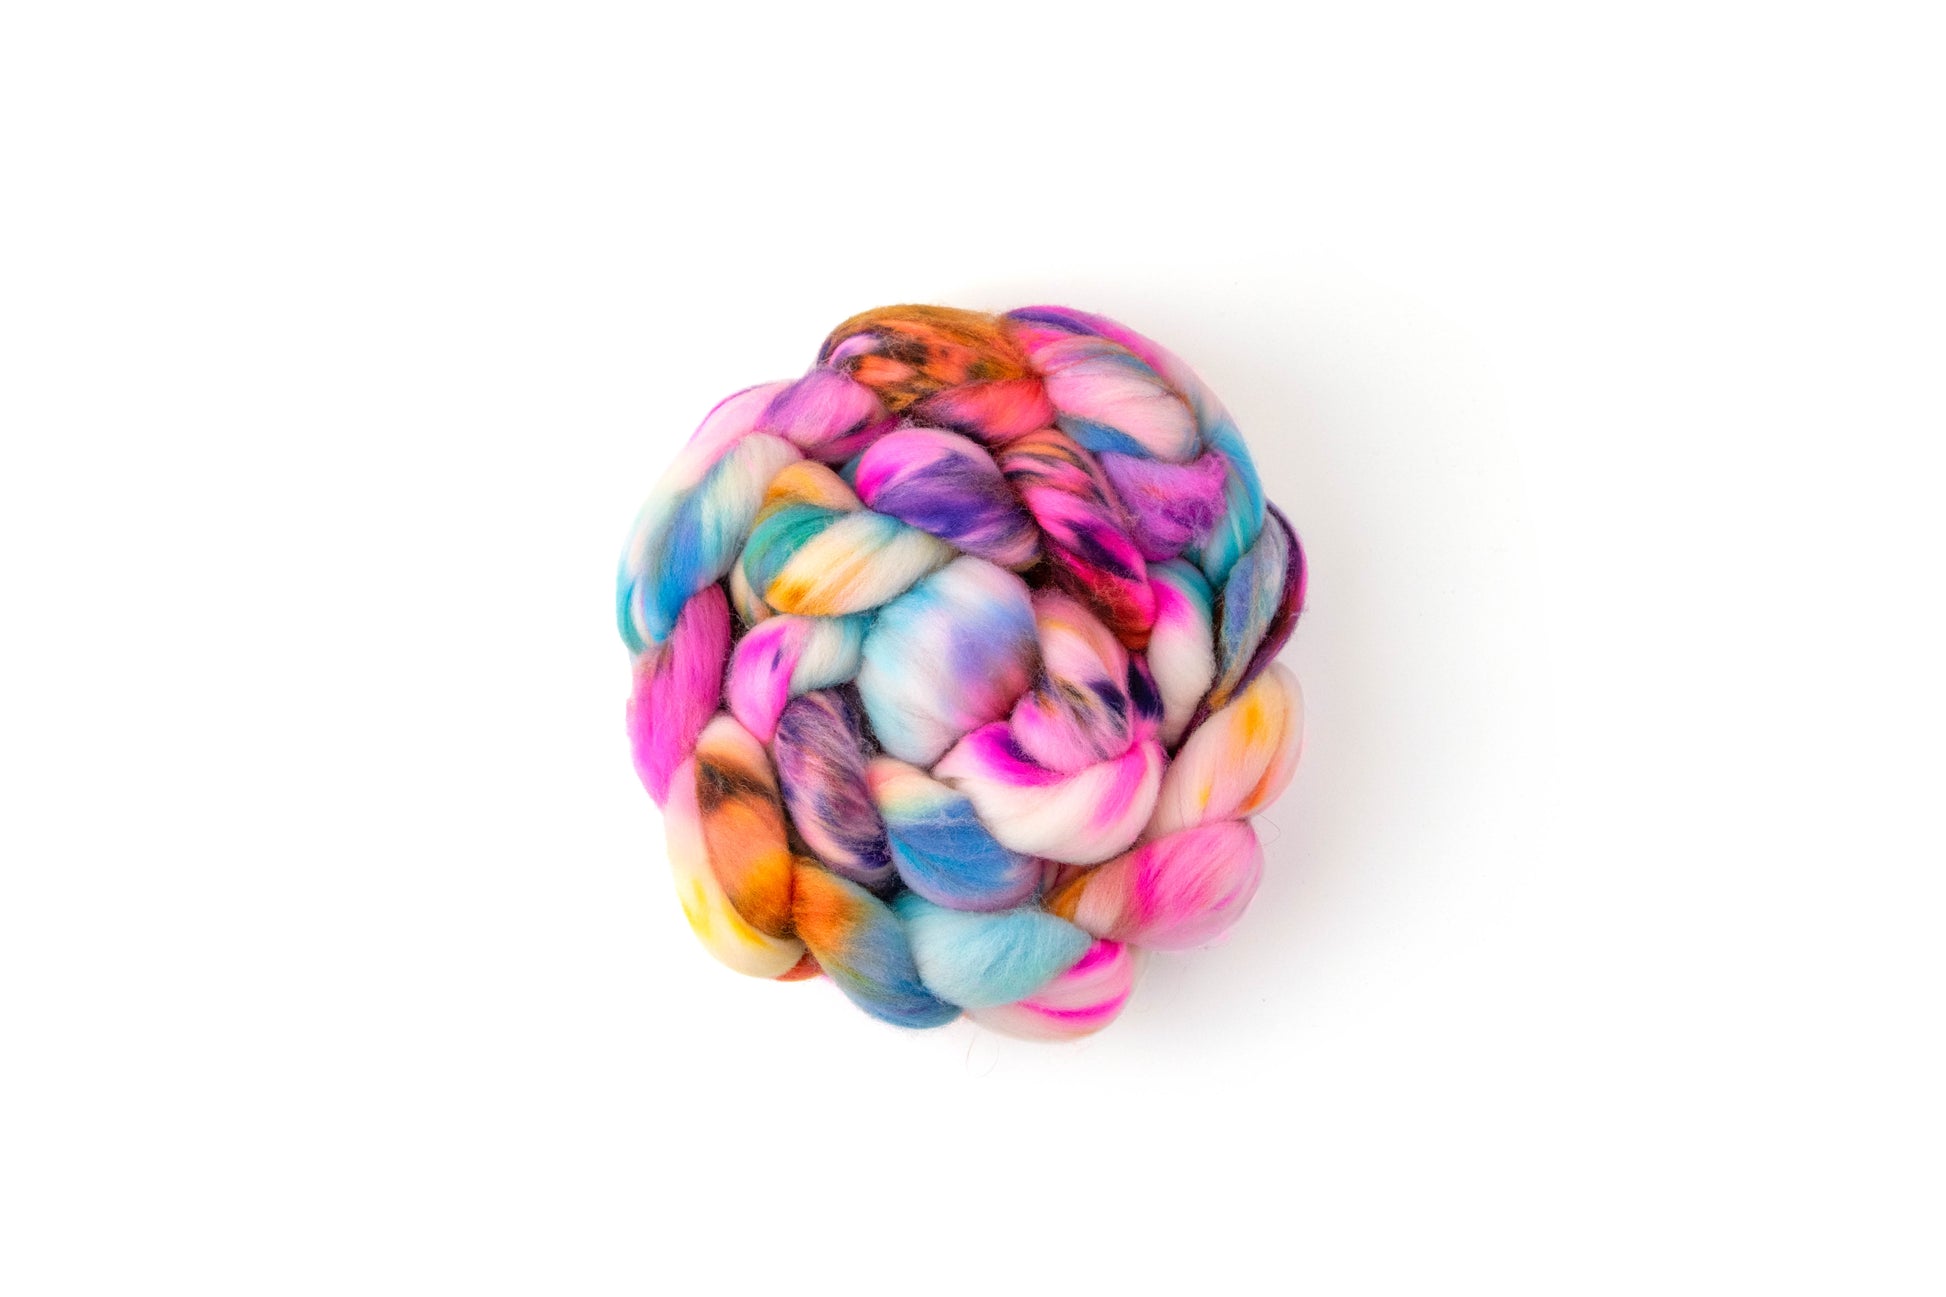 A braid of bright fiber wrapped into a circle of pink, orange, blue, and purple with a white base.